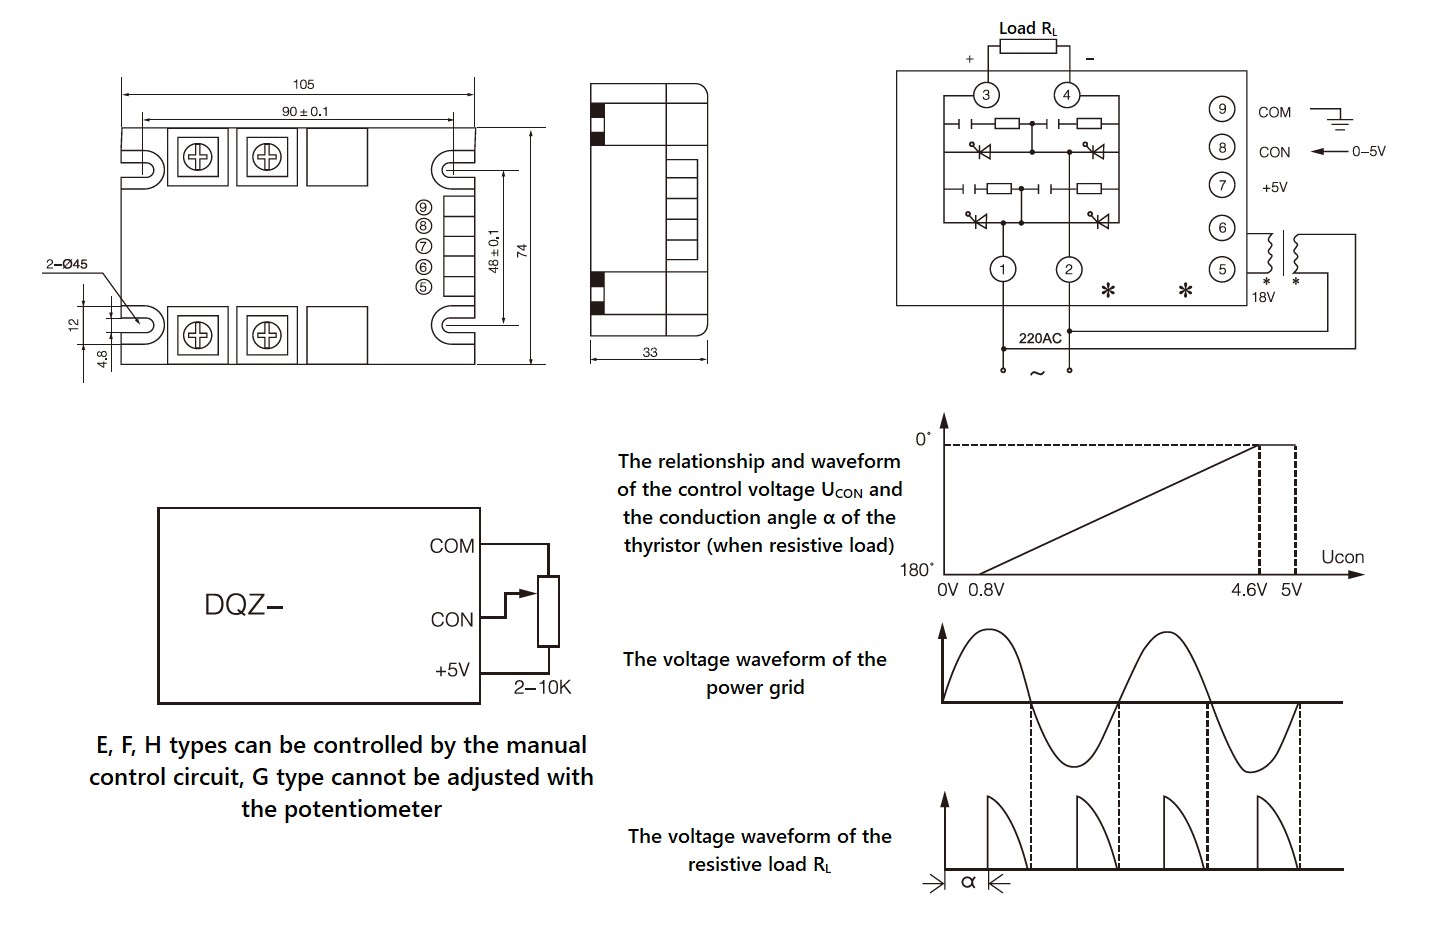 Dimensions, Wiring diagram and Signal relationship waveform - MGR DQZ series